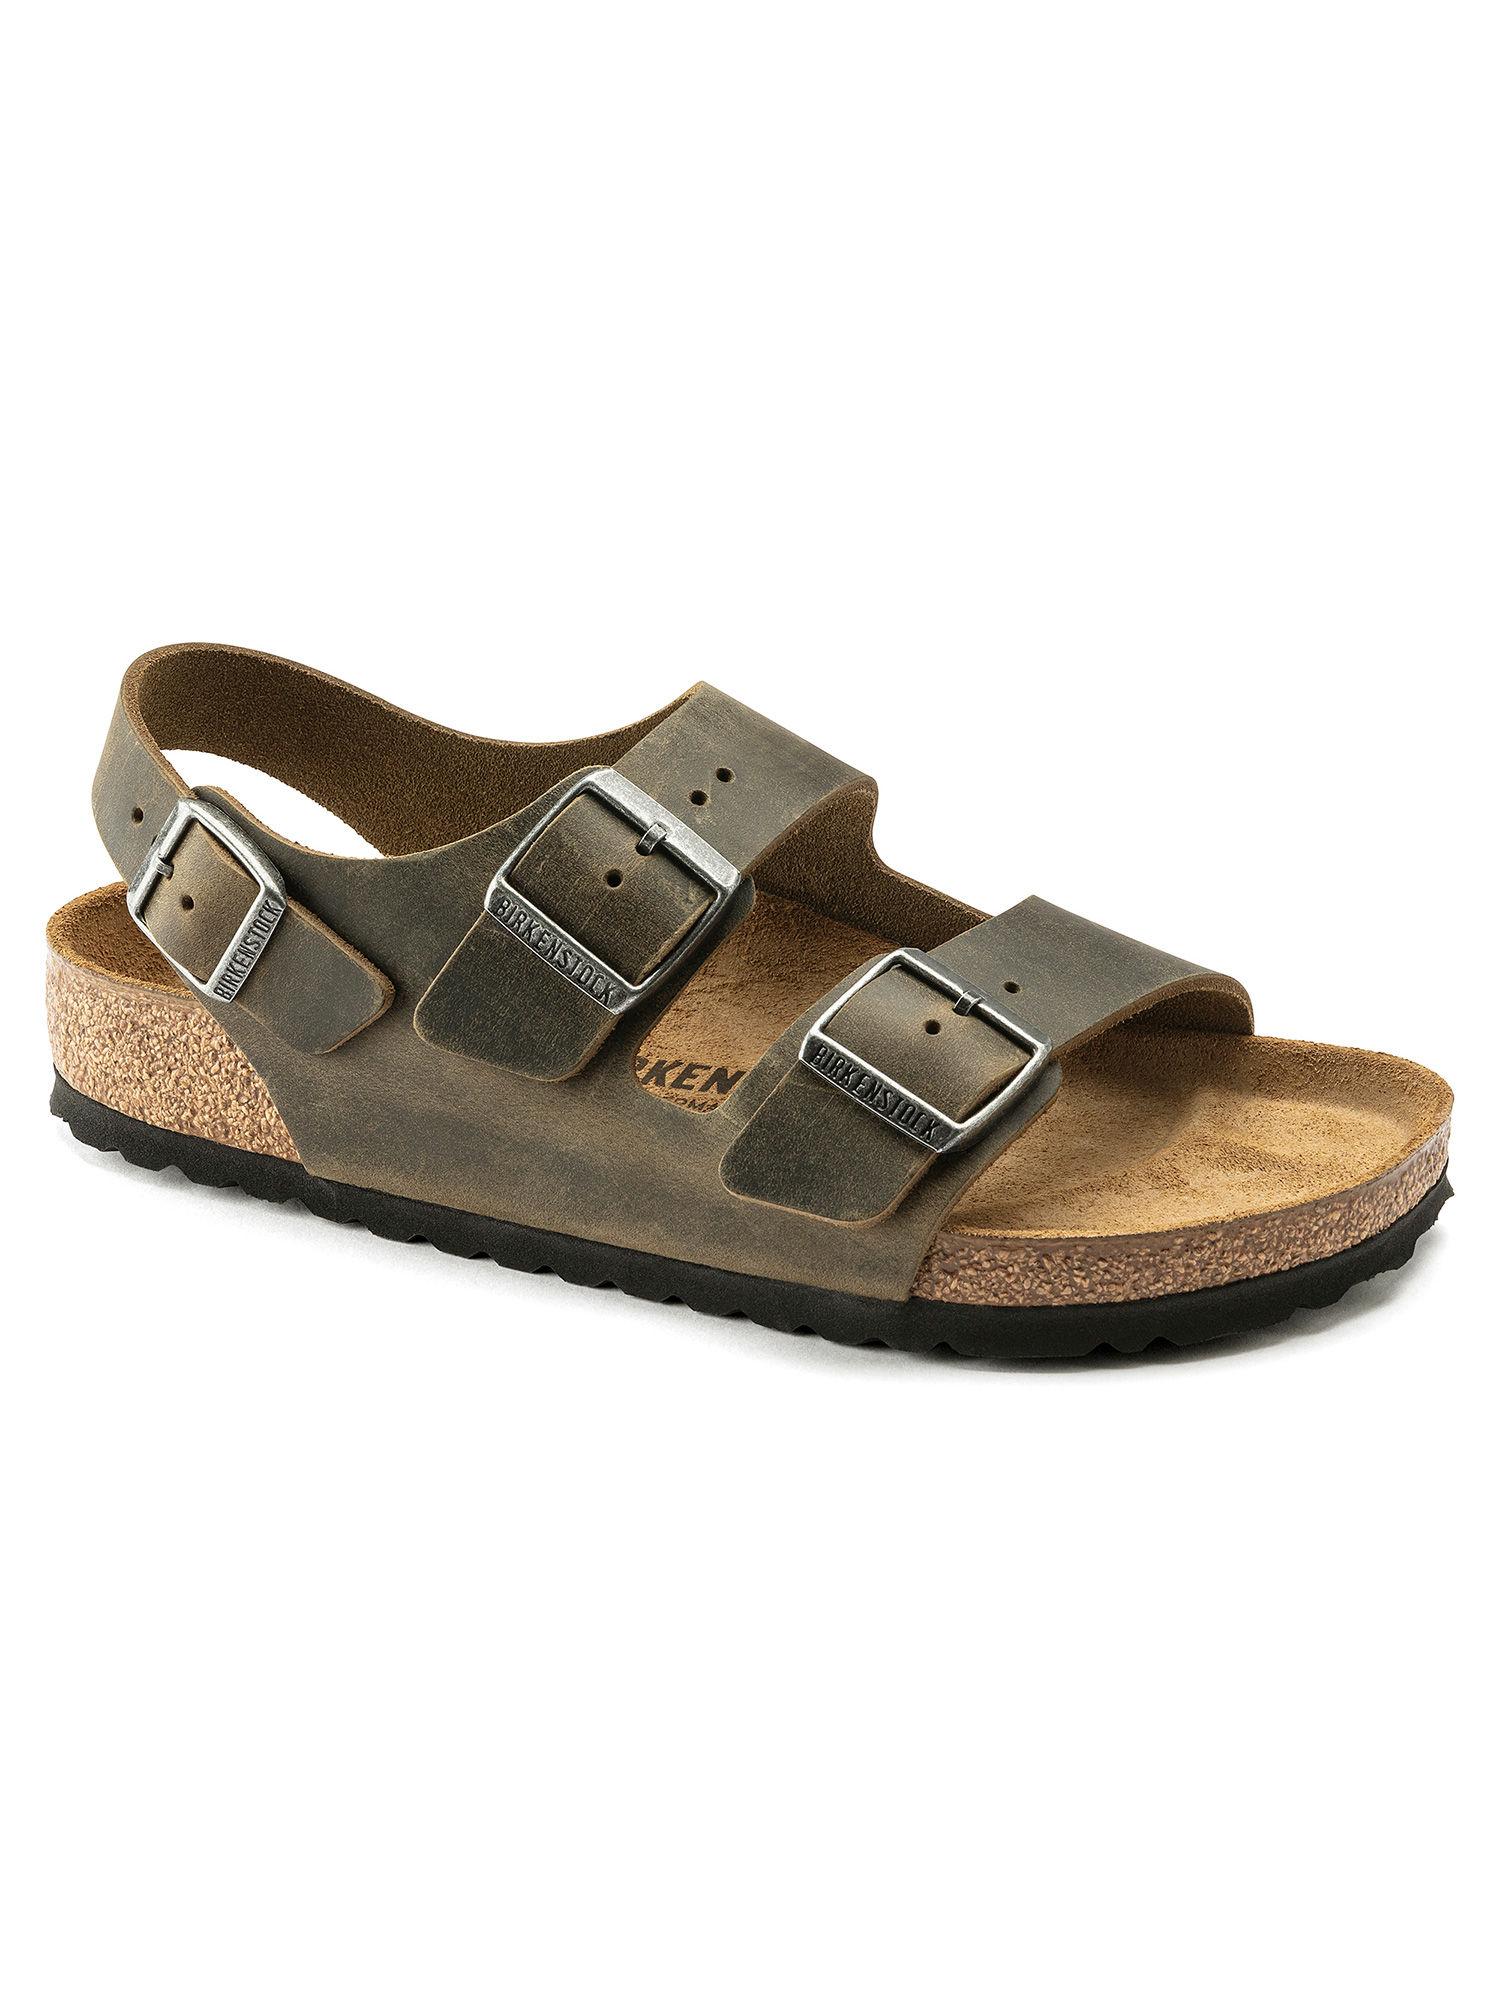 Milano Oiled Leather Green Regular Width Unisex Sandals